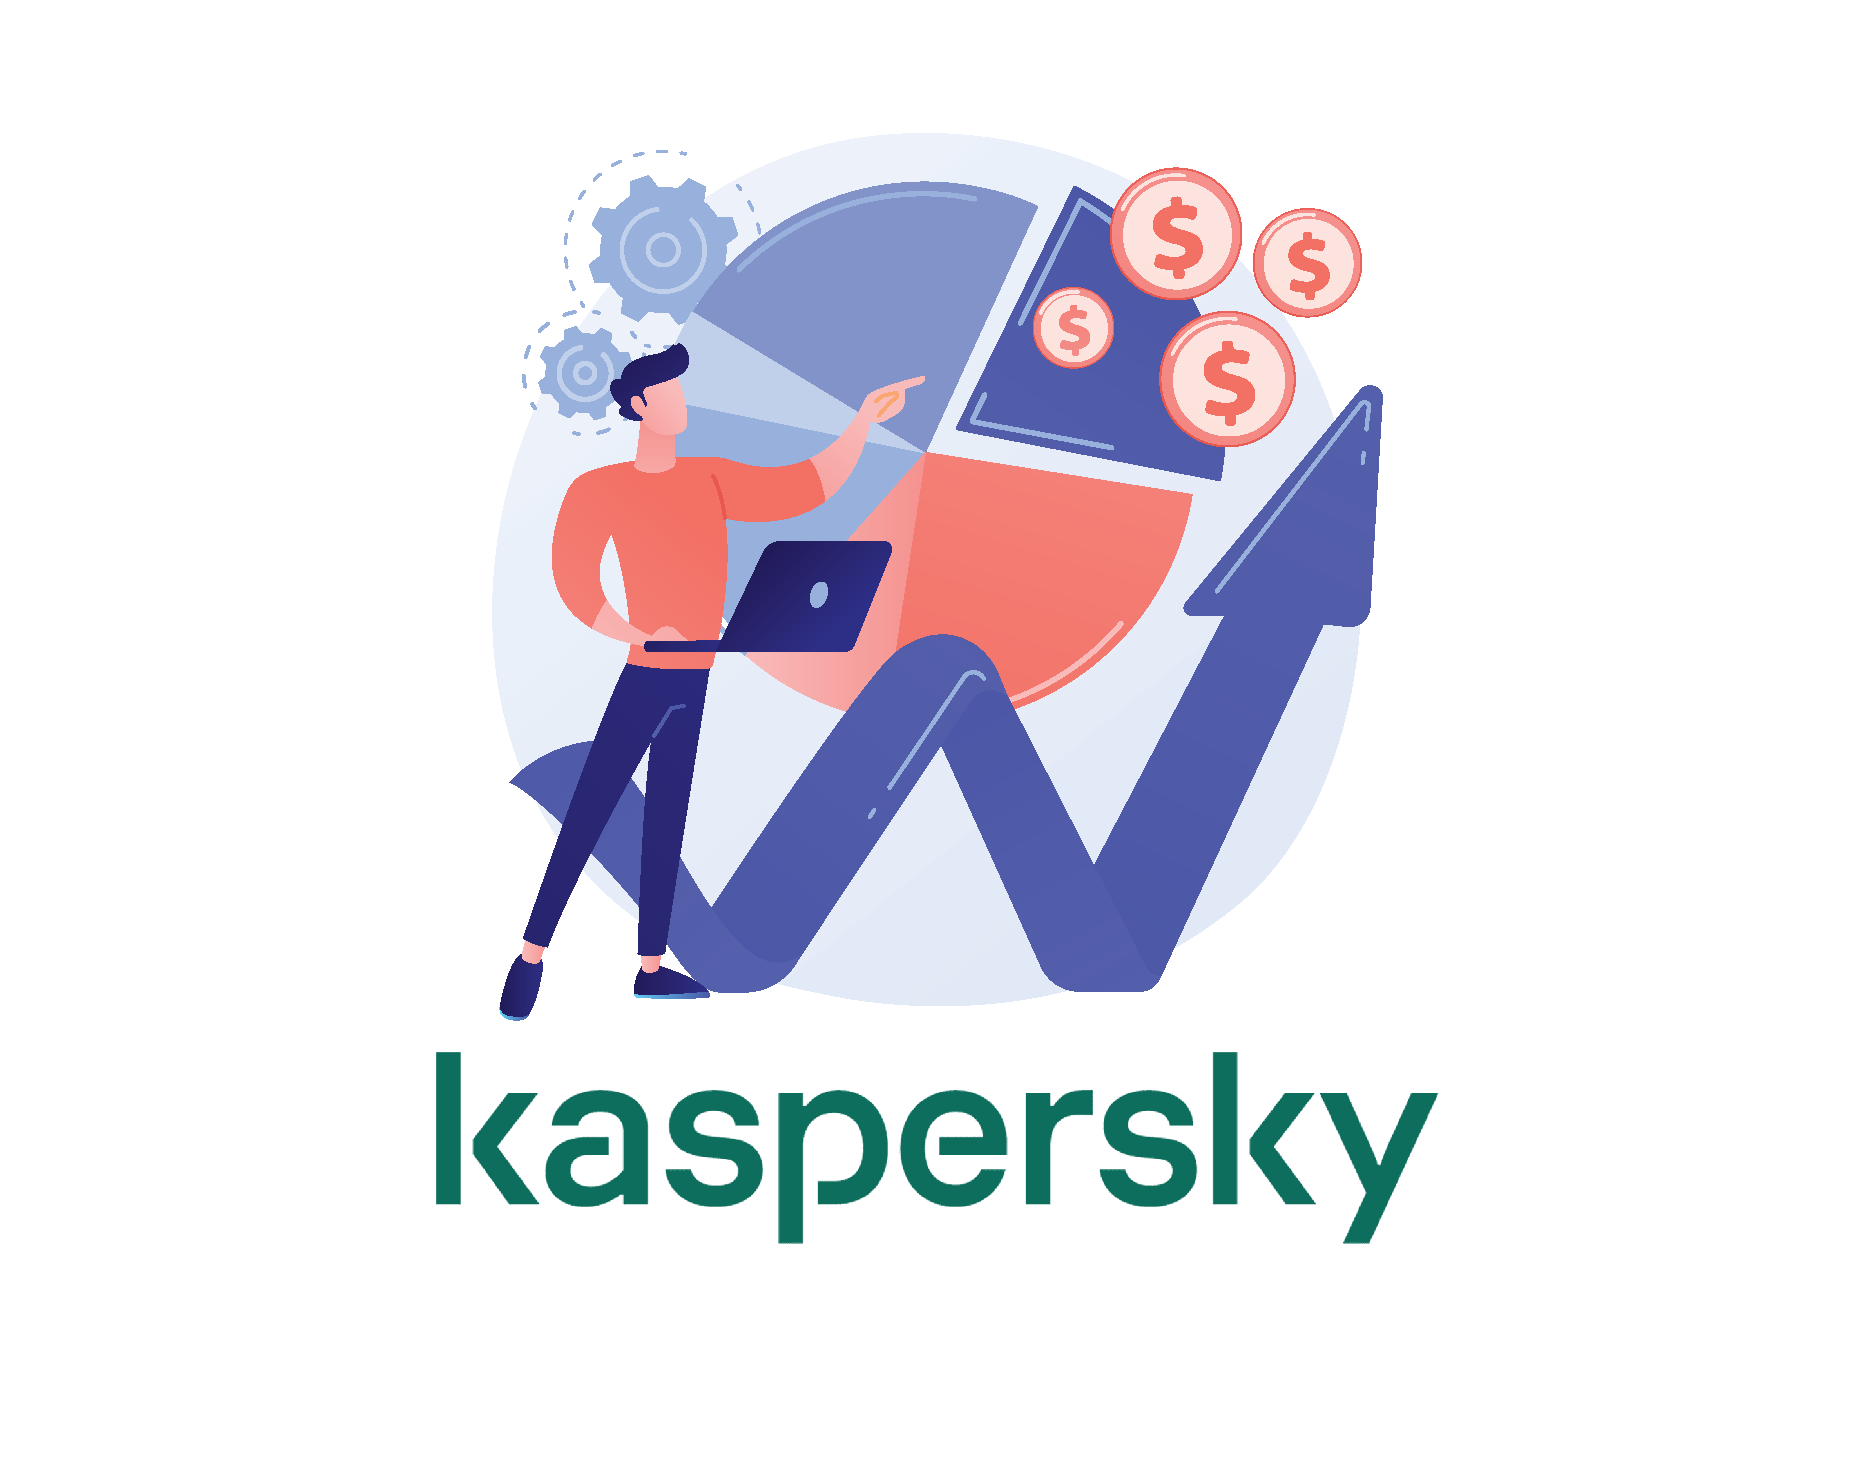 Kaspersky delivered stable business growth in 2021